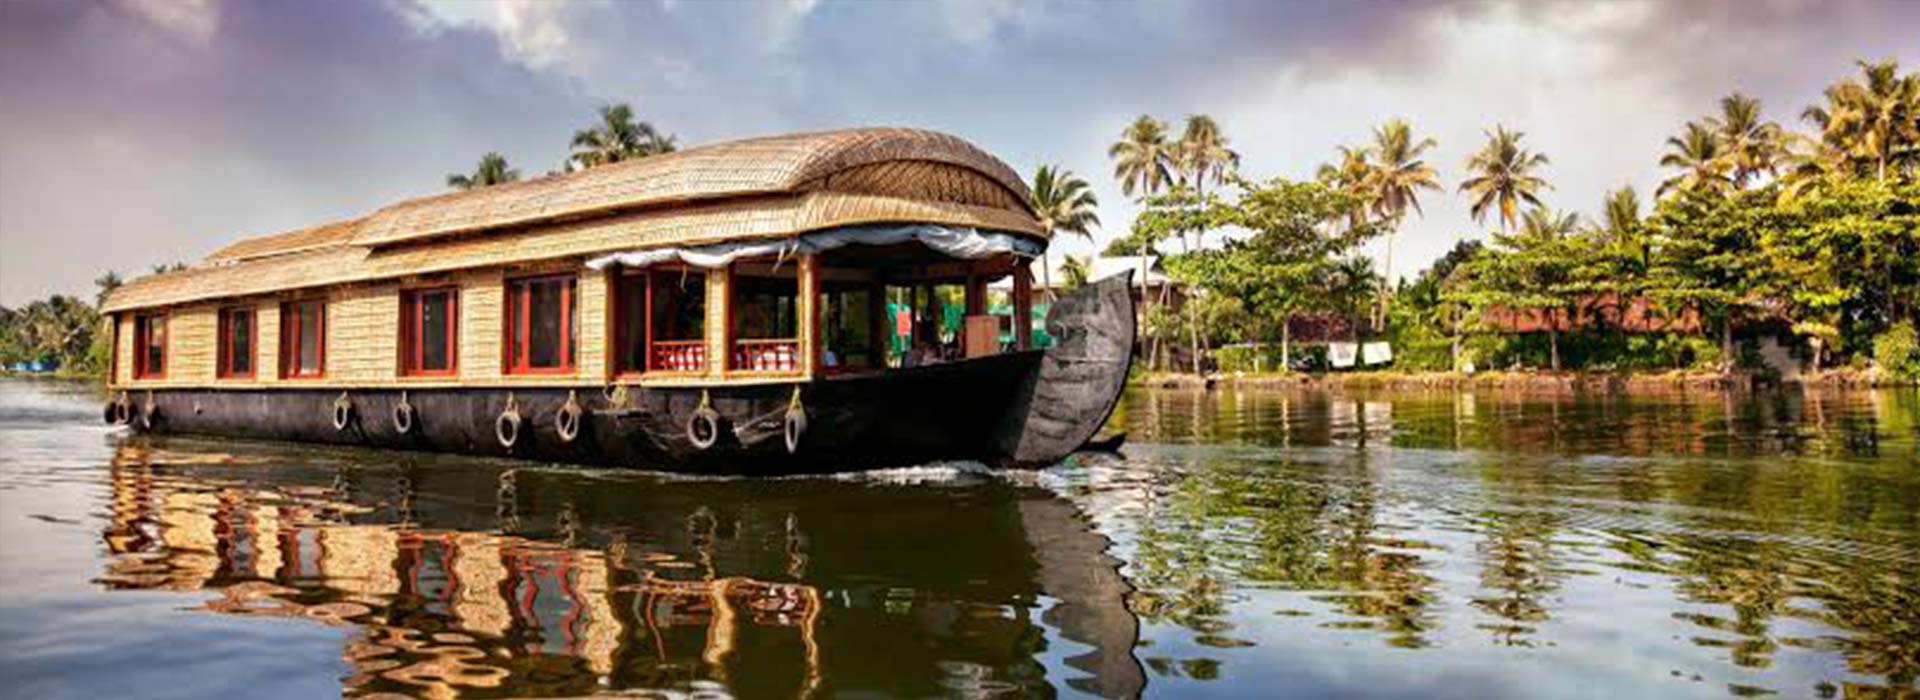 KERALA’S JOURNEY THROUGH BACK WATERS
By HOUSEBOAT